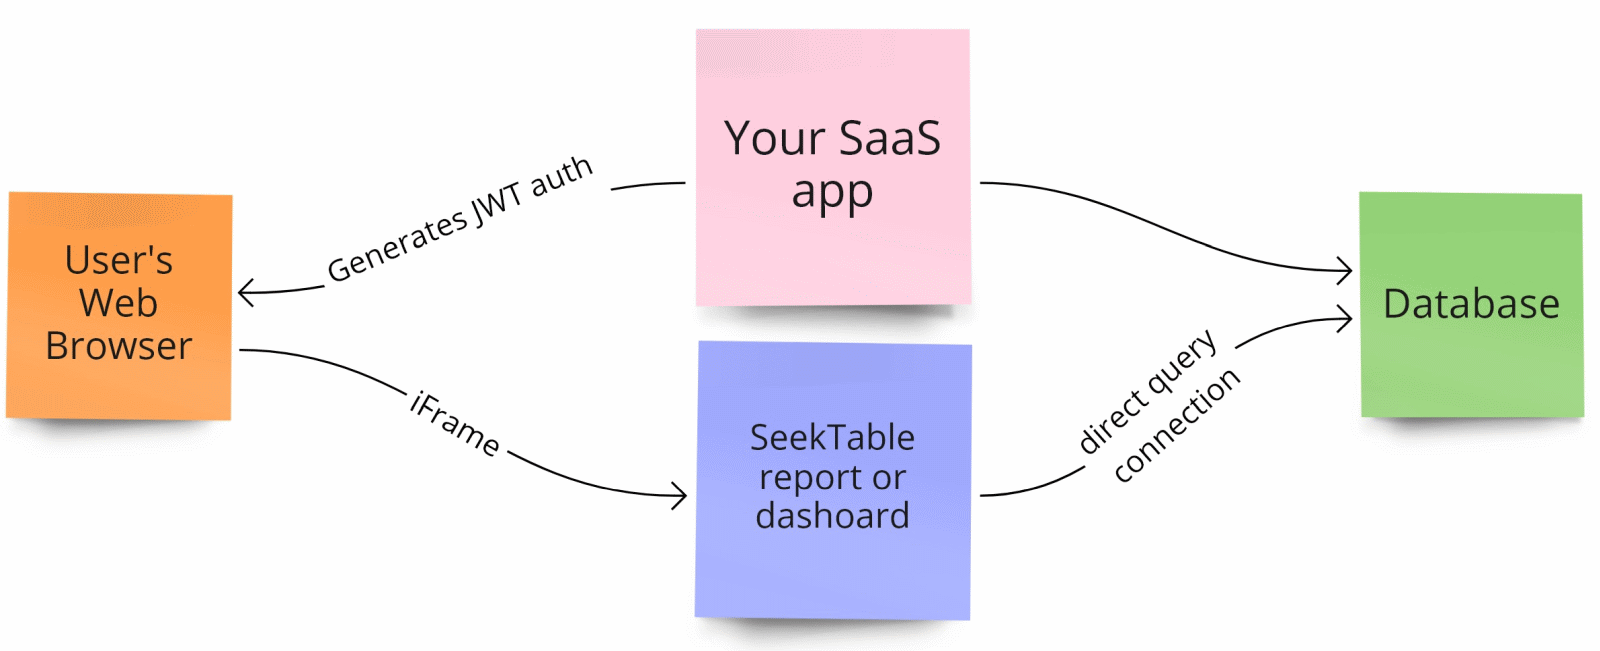 SeekTable Embedded Integration into your SaaS app